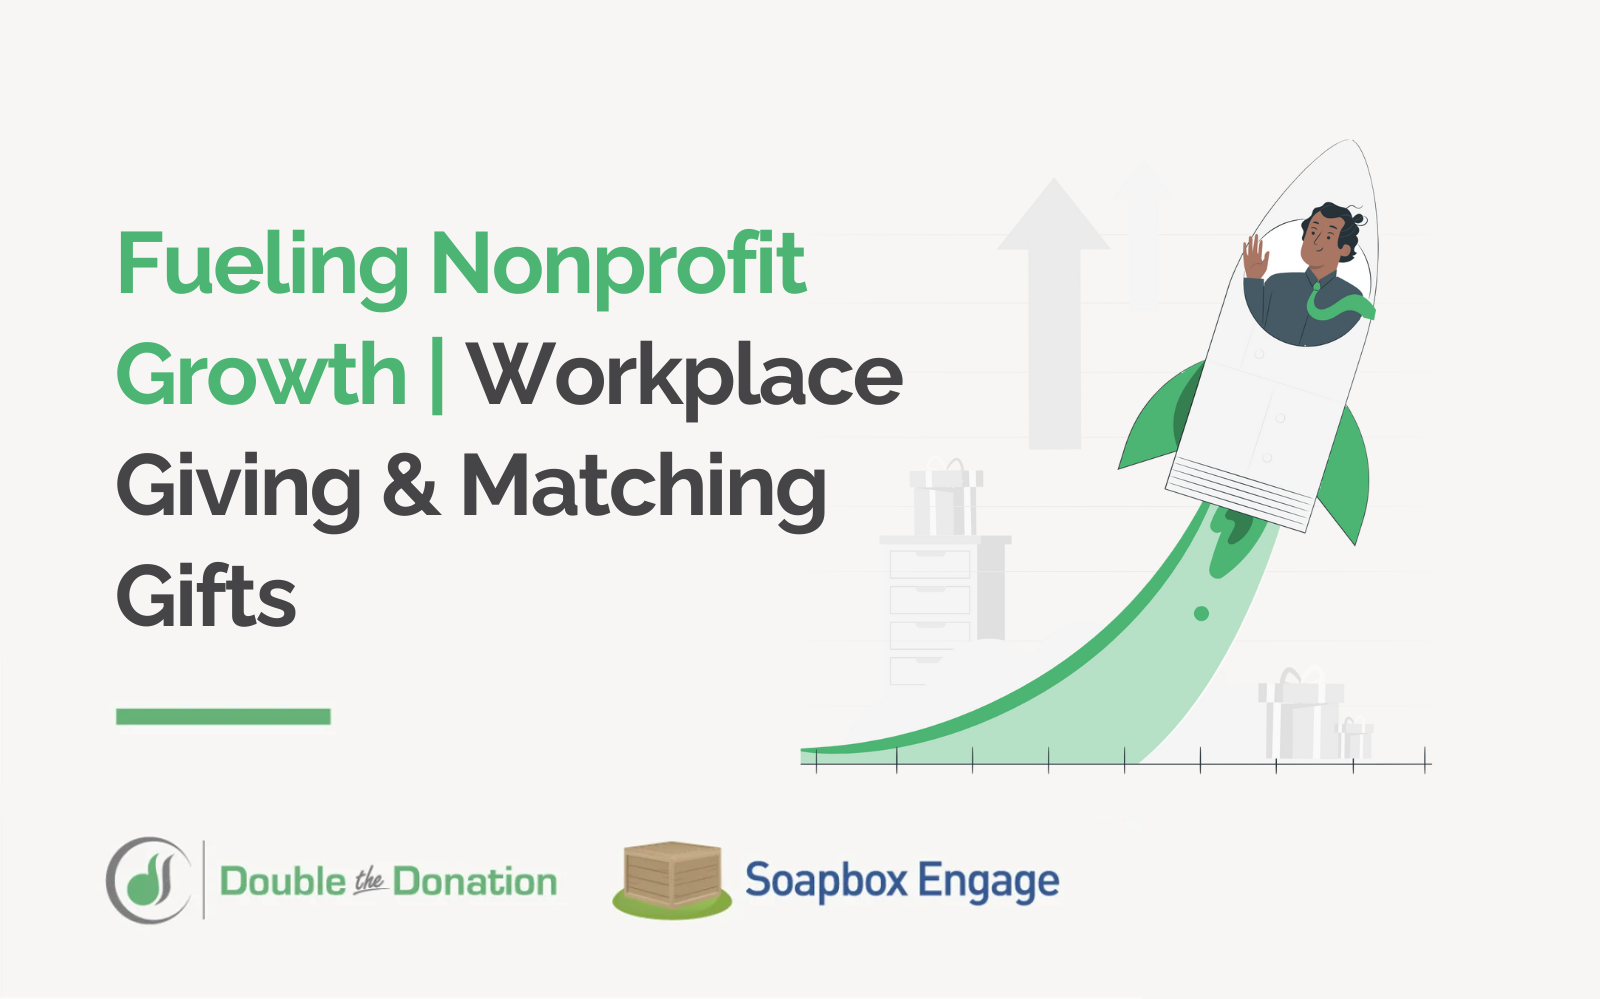 Fueling Nonprofit Growth | Workplace Giving & Matching Gifts